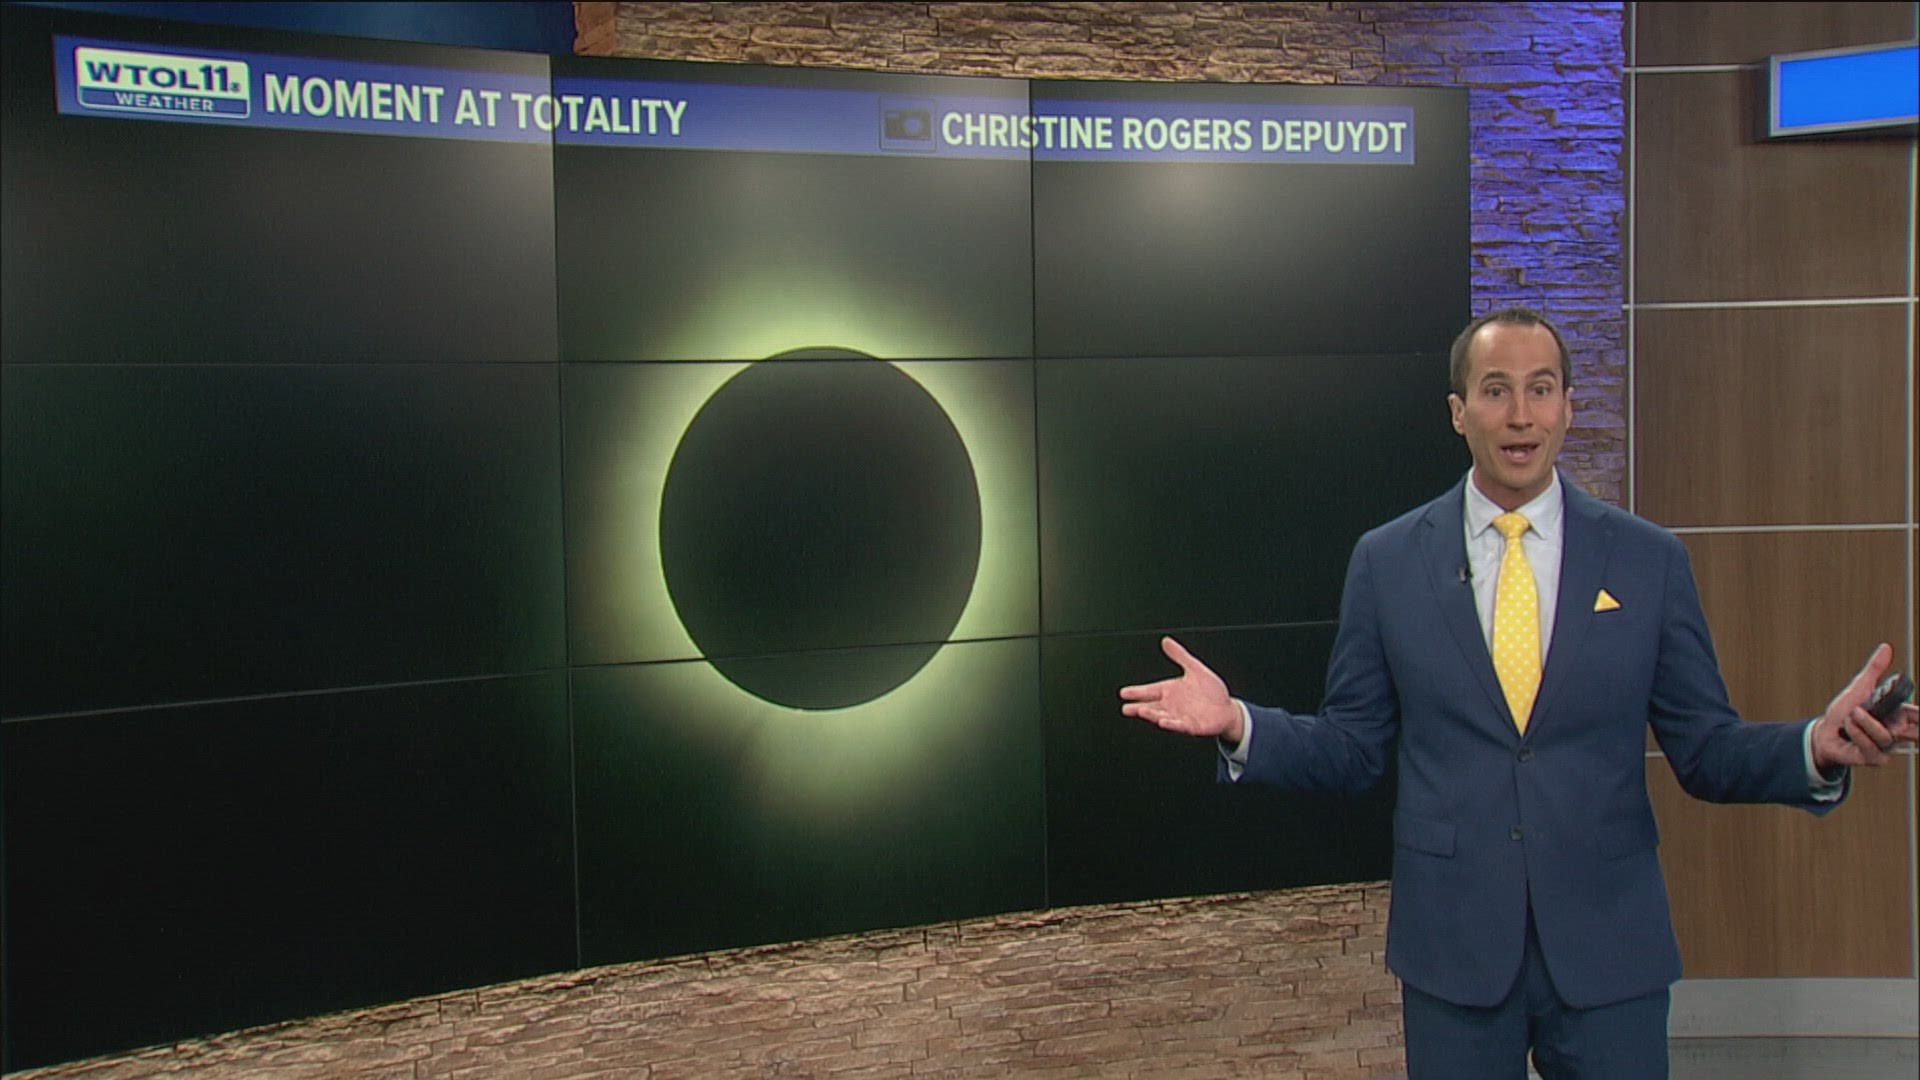 WTOL 11 chief meteorologist Chris Vickers talks about what exactly was seen during the total solar eclipse on Monday.